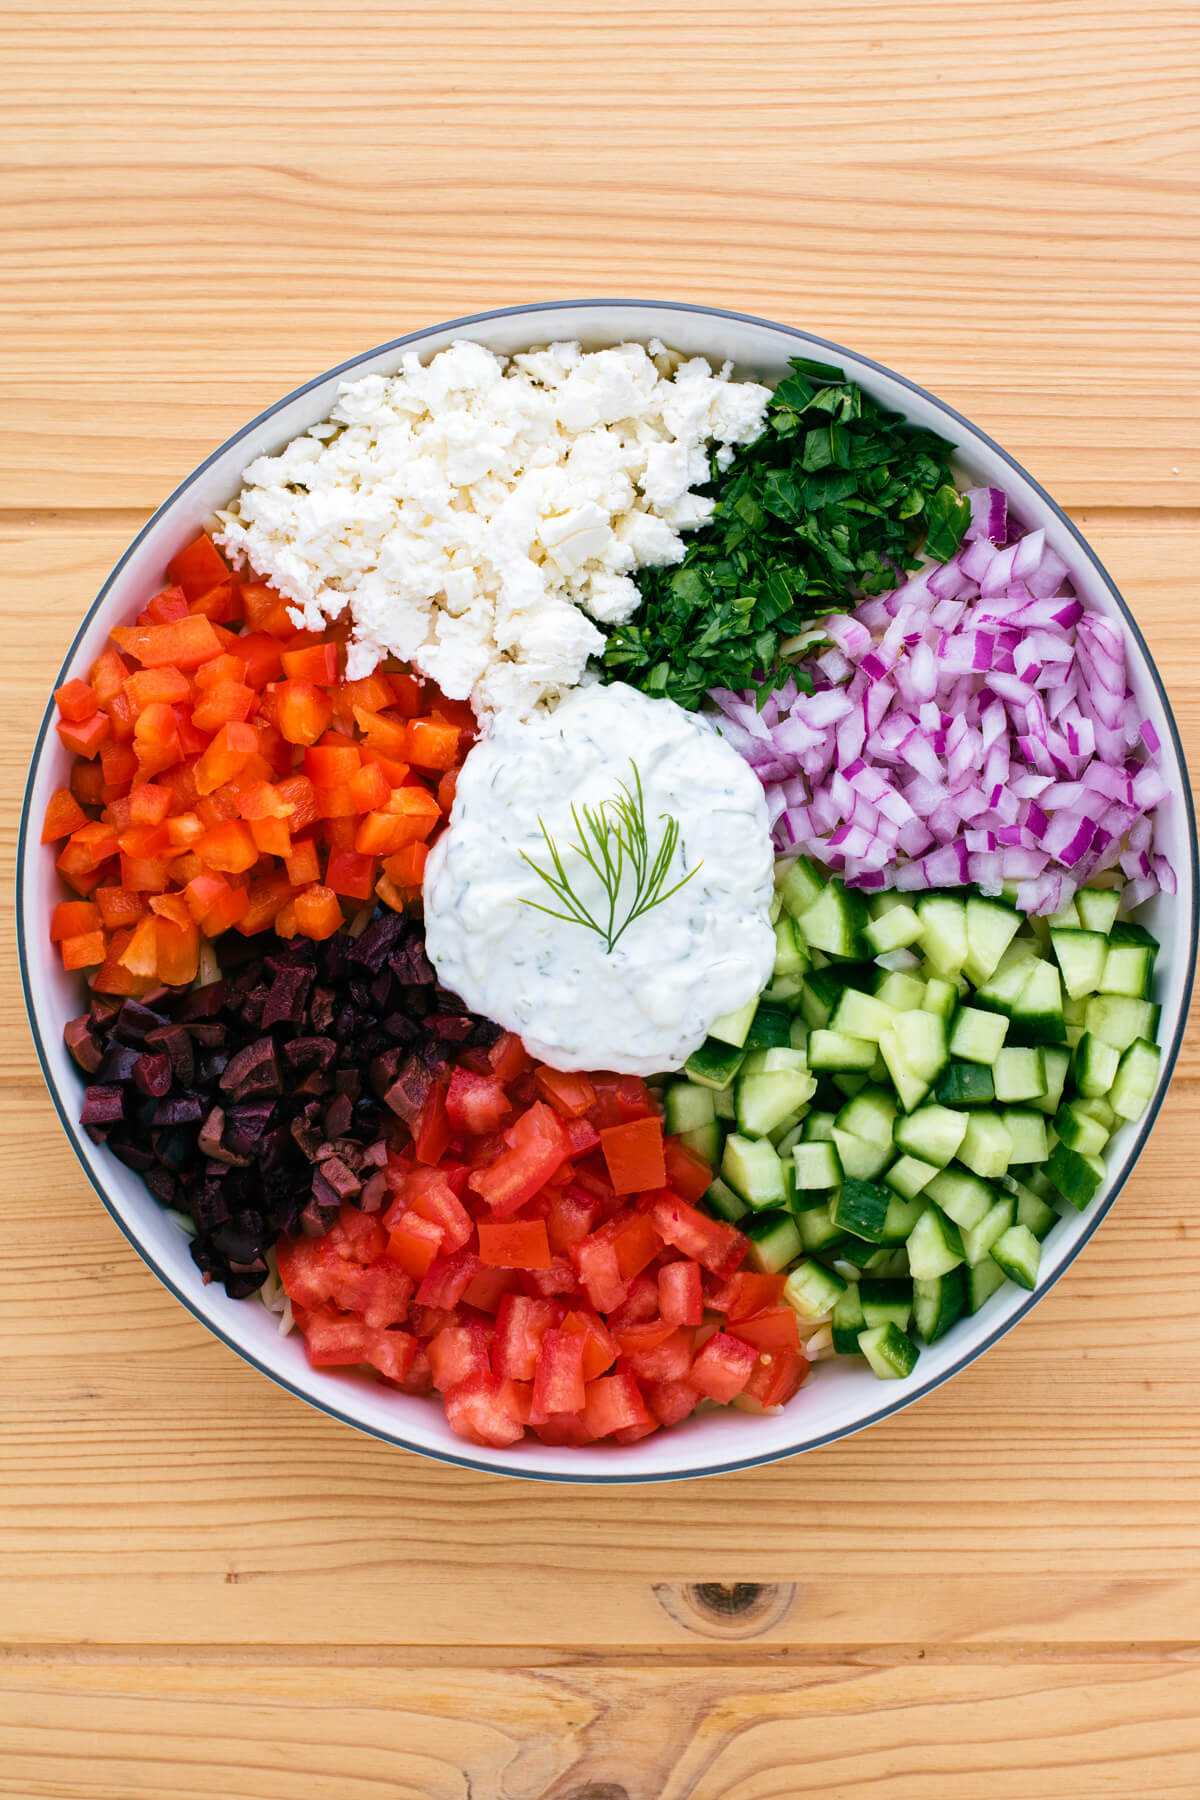 A bowl of salad ingredients before they are mixed together.